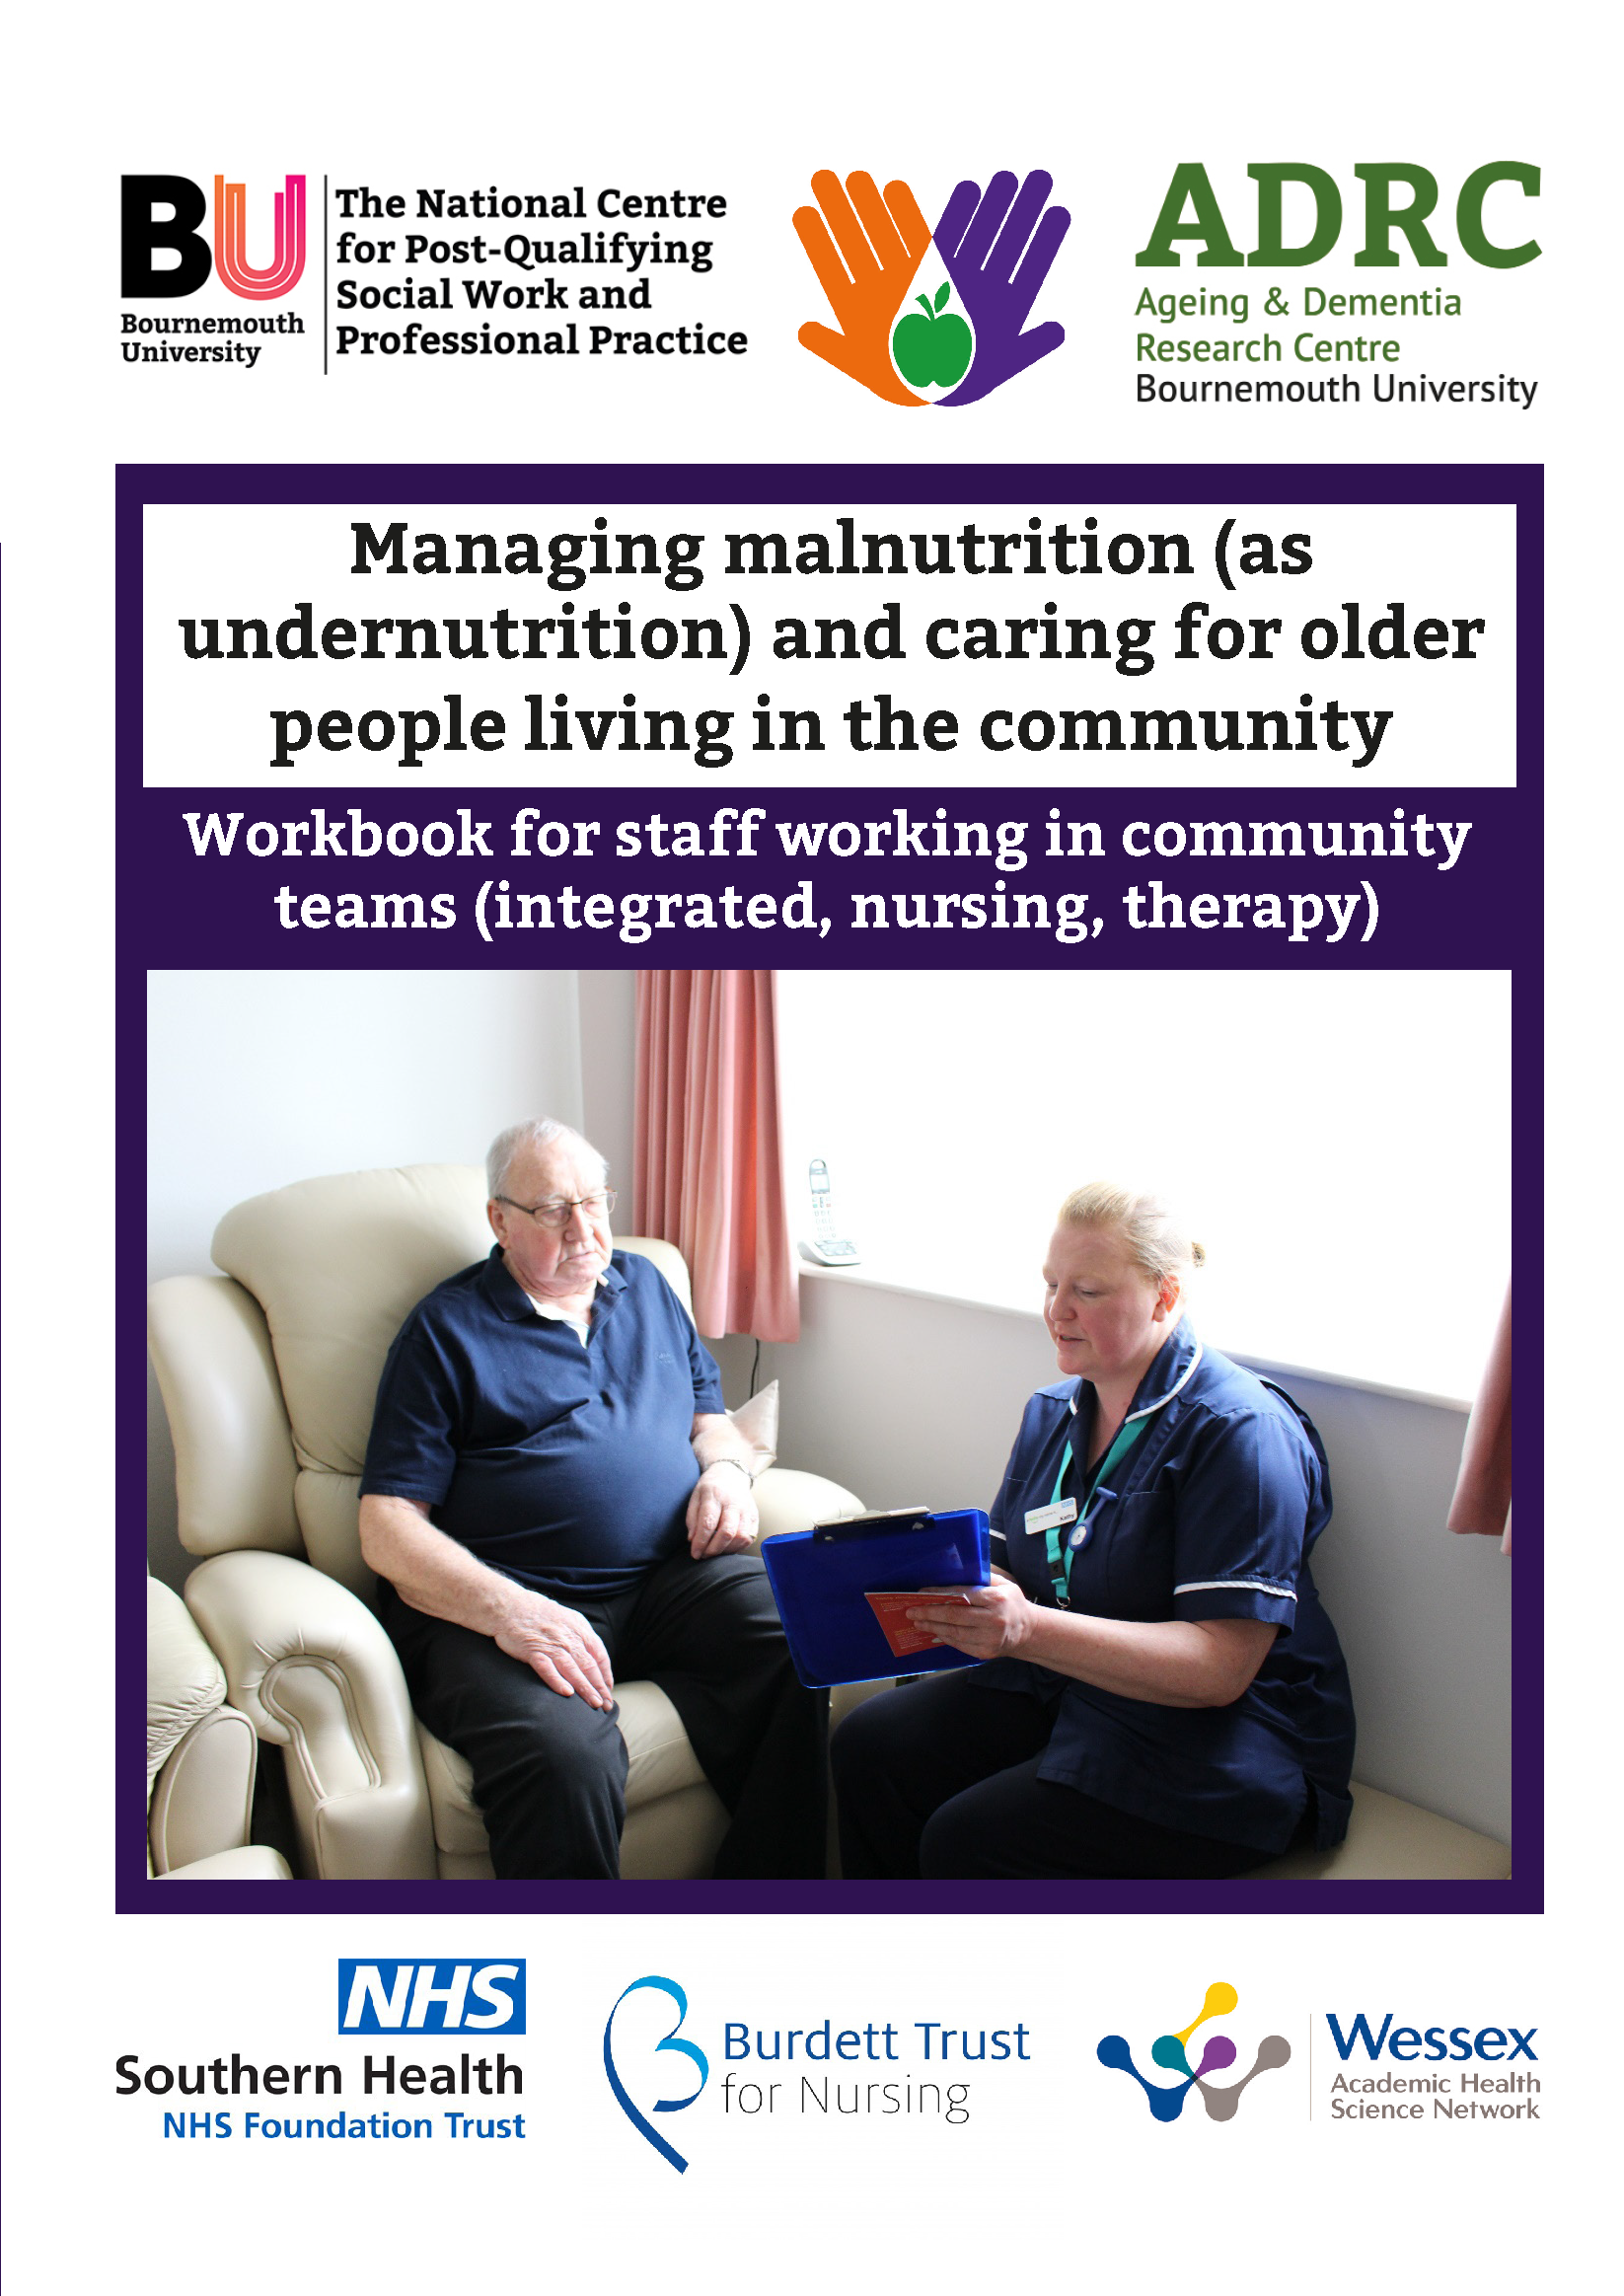 Managing malnutrition and caring for older people in the community guidebook